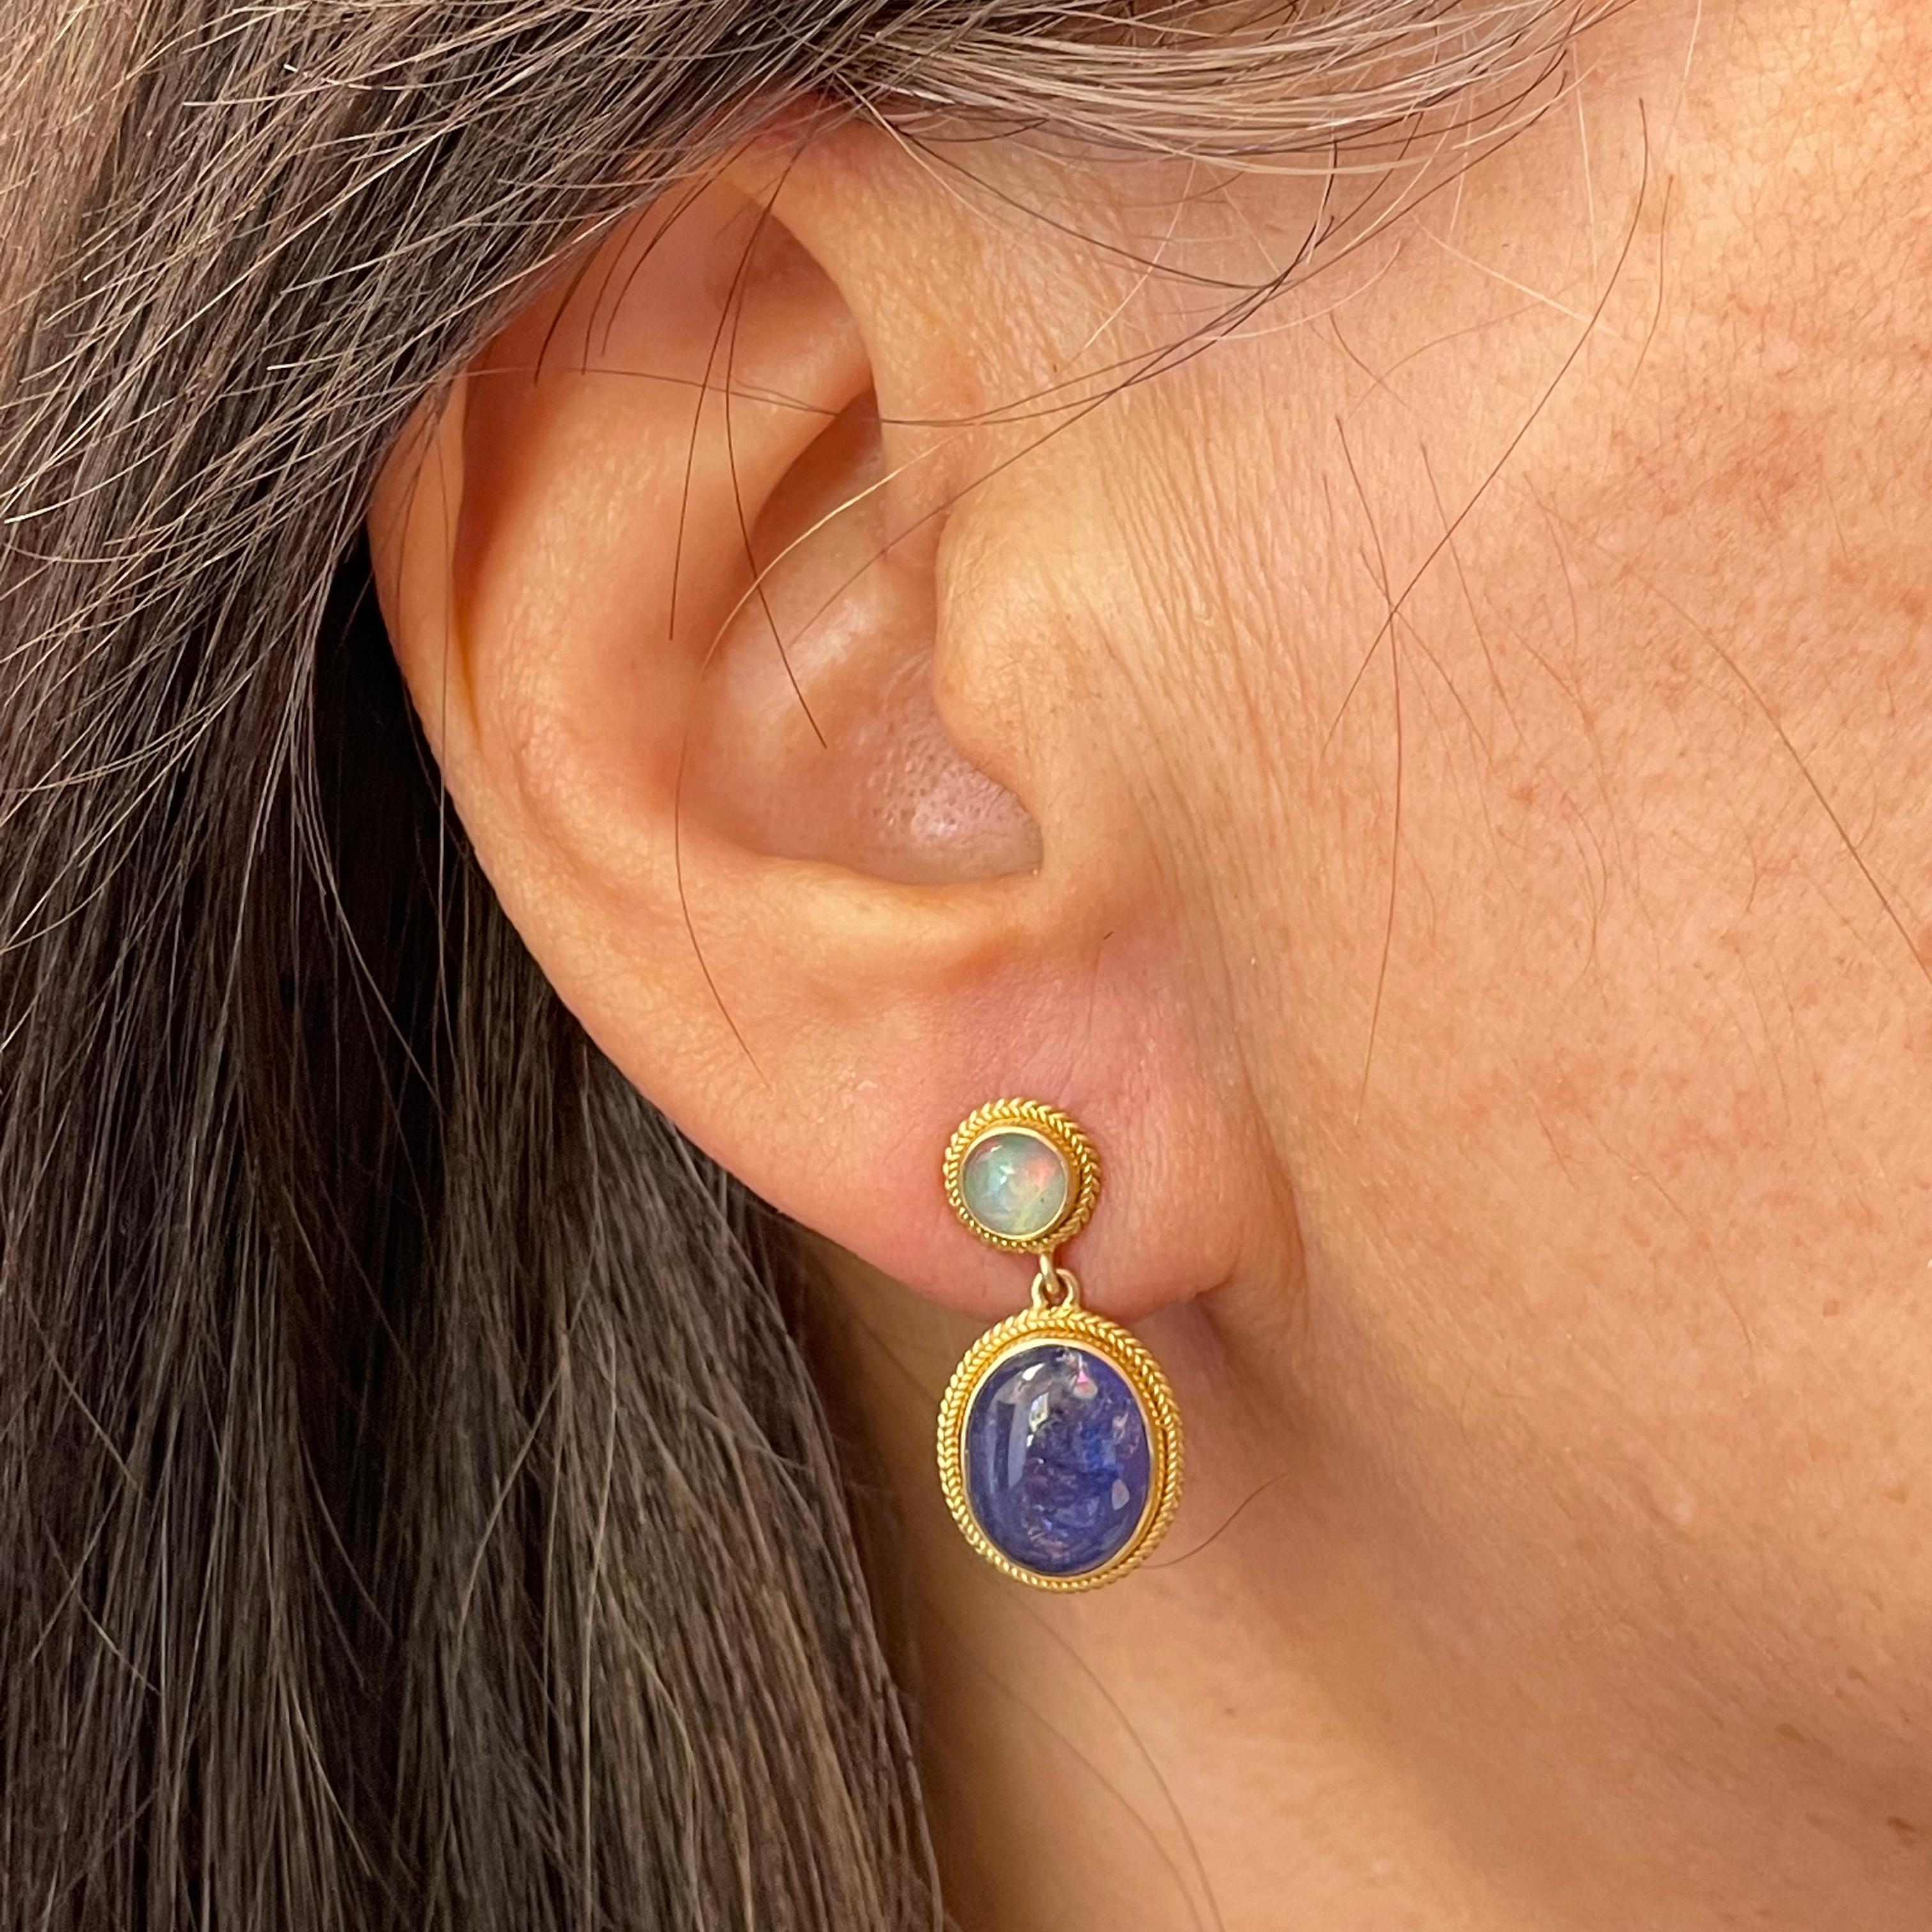 Complementary deep blue 9 x 11 mm tanzanite cabochons are paired with fiery greenish and reddish Ethiopian opal 5mm rounds in this Steven Battelle design.  The stones are surrounded by rich double-braided wire settings to enhance.  